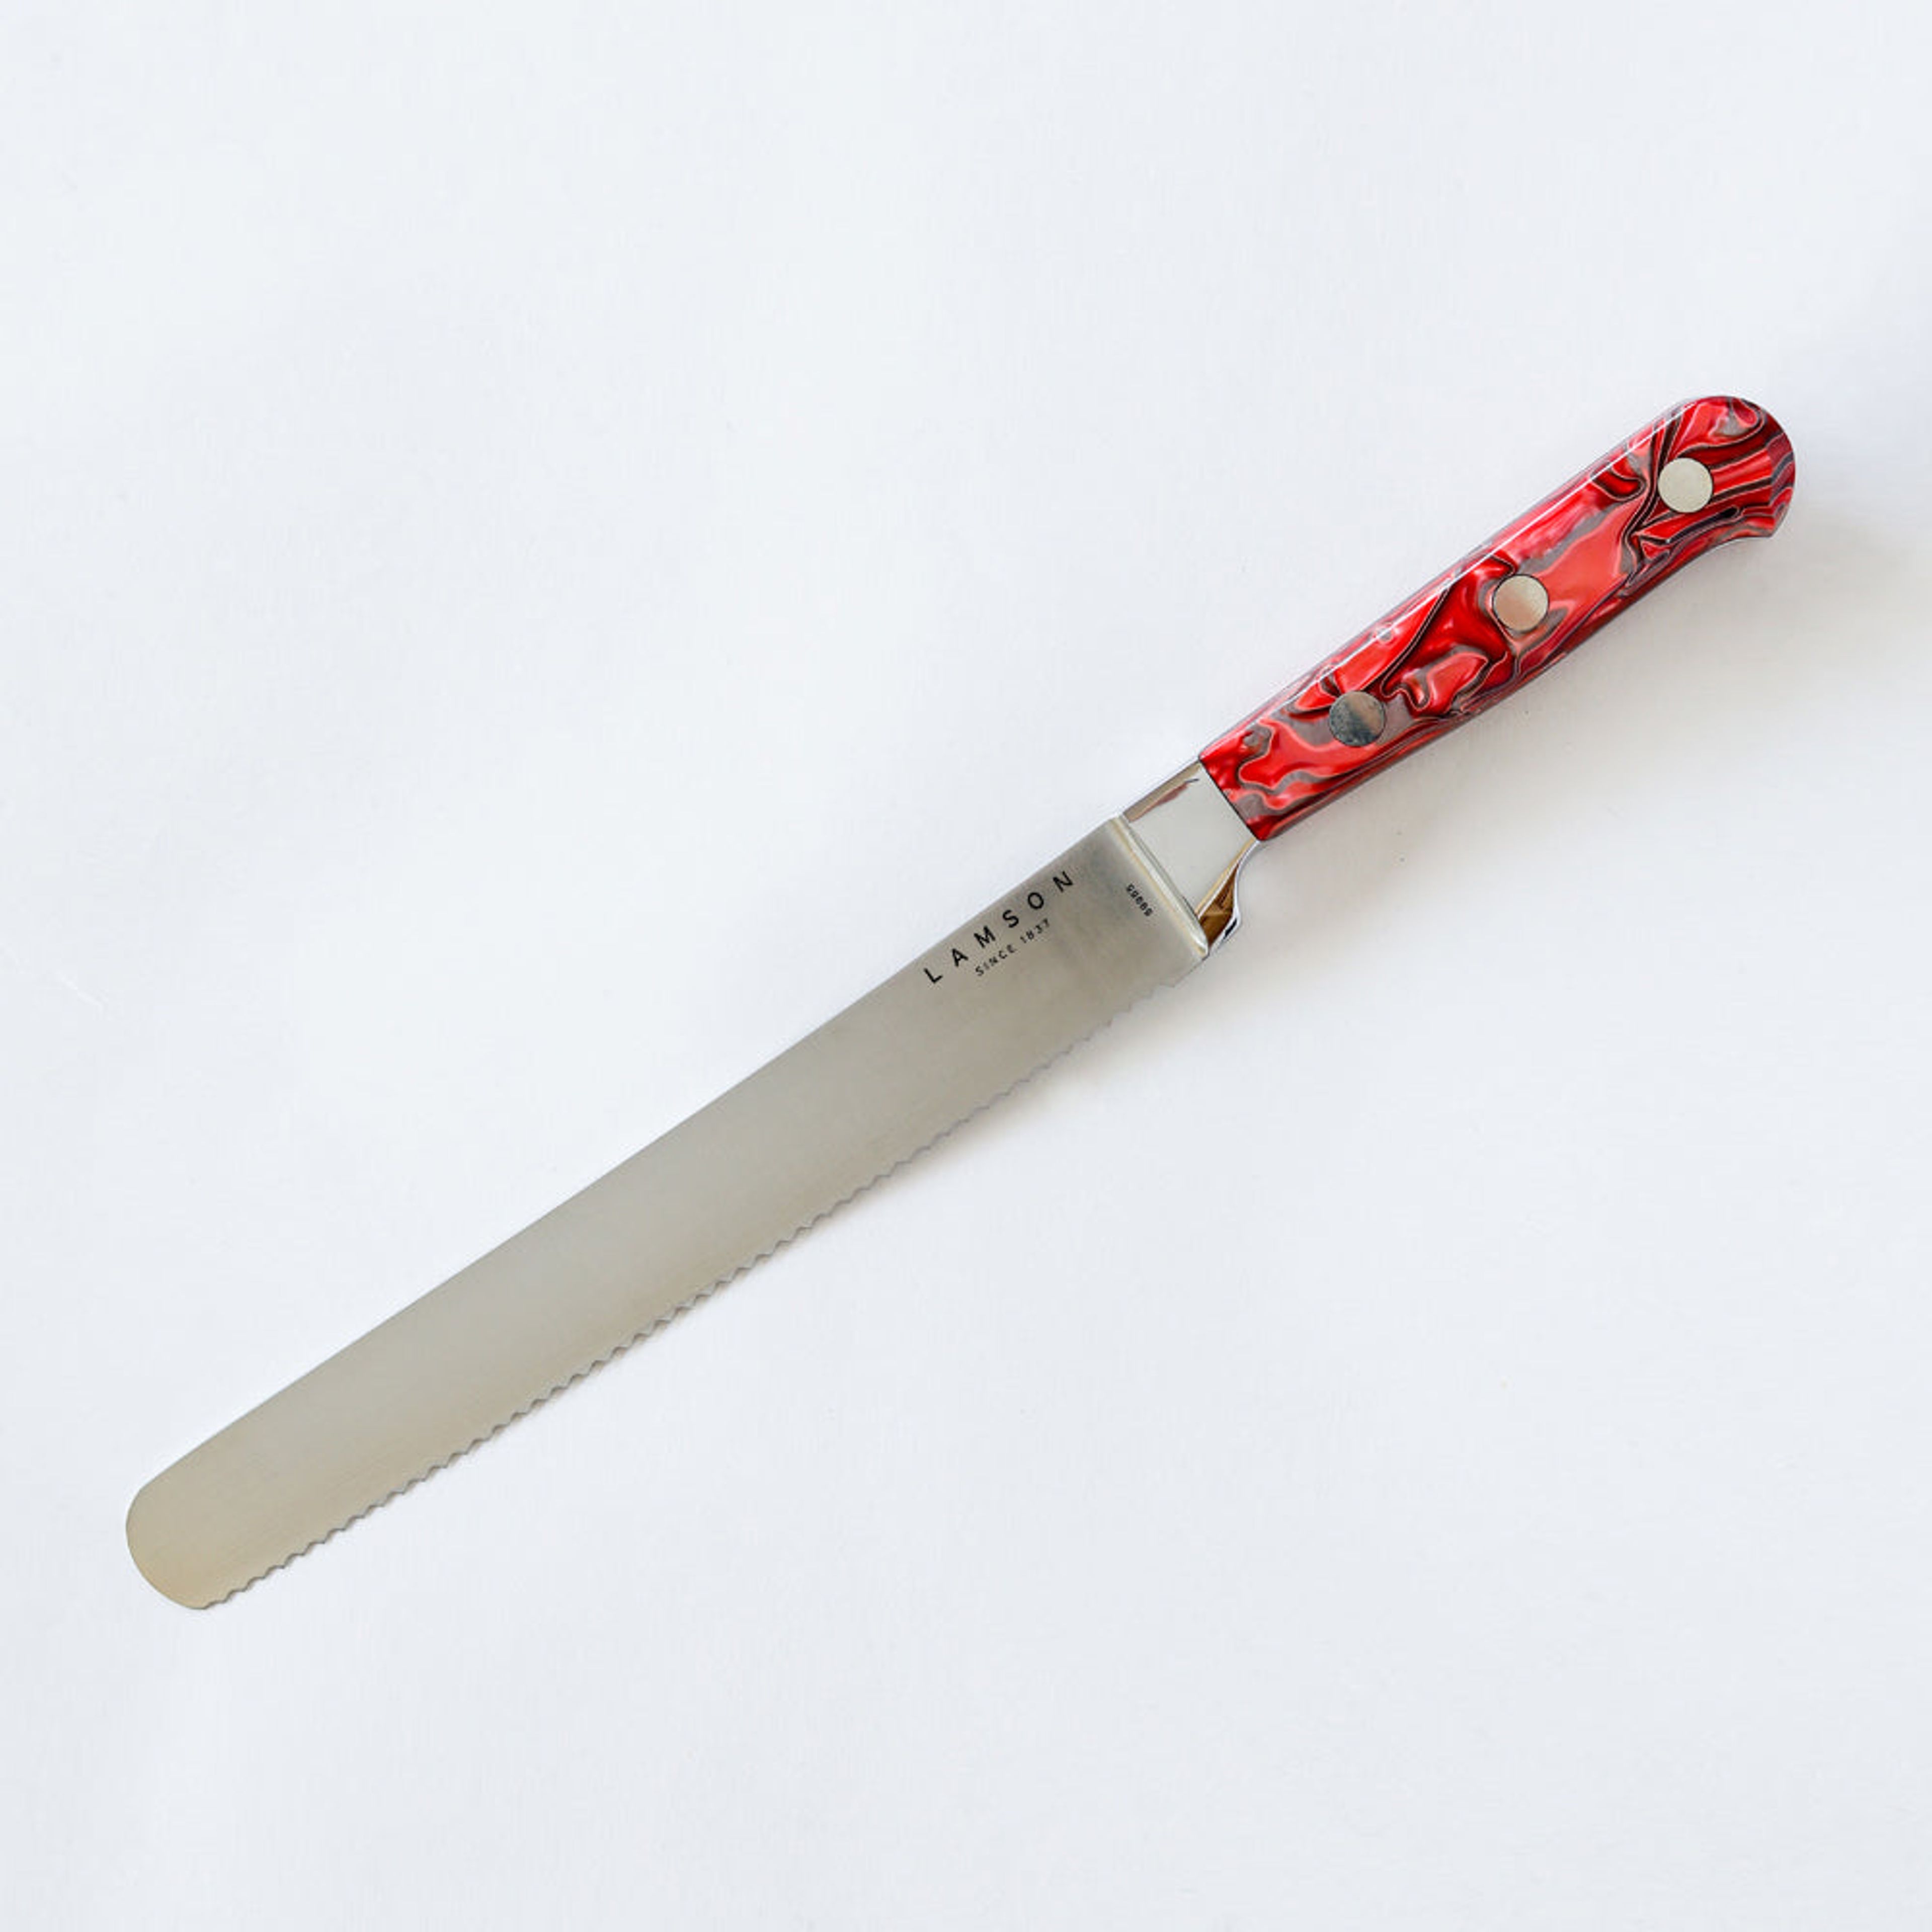 8" Premier Forged Serrated Bread Knife